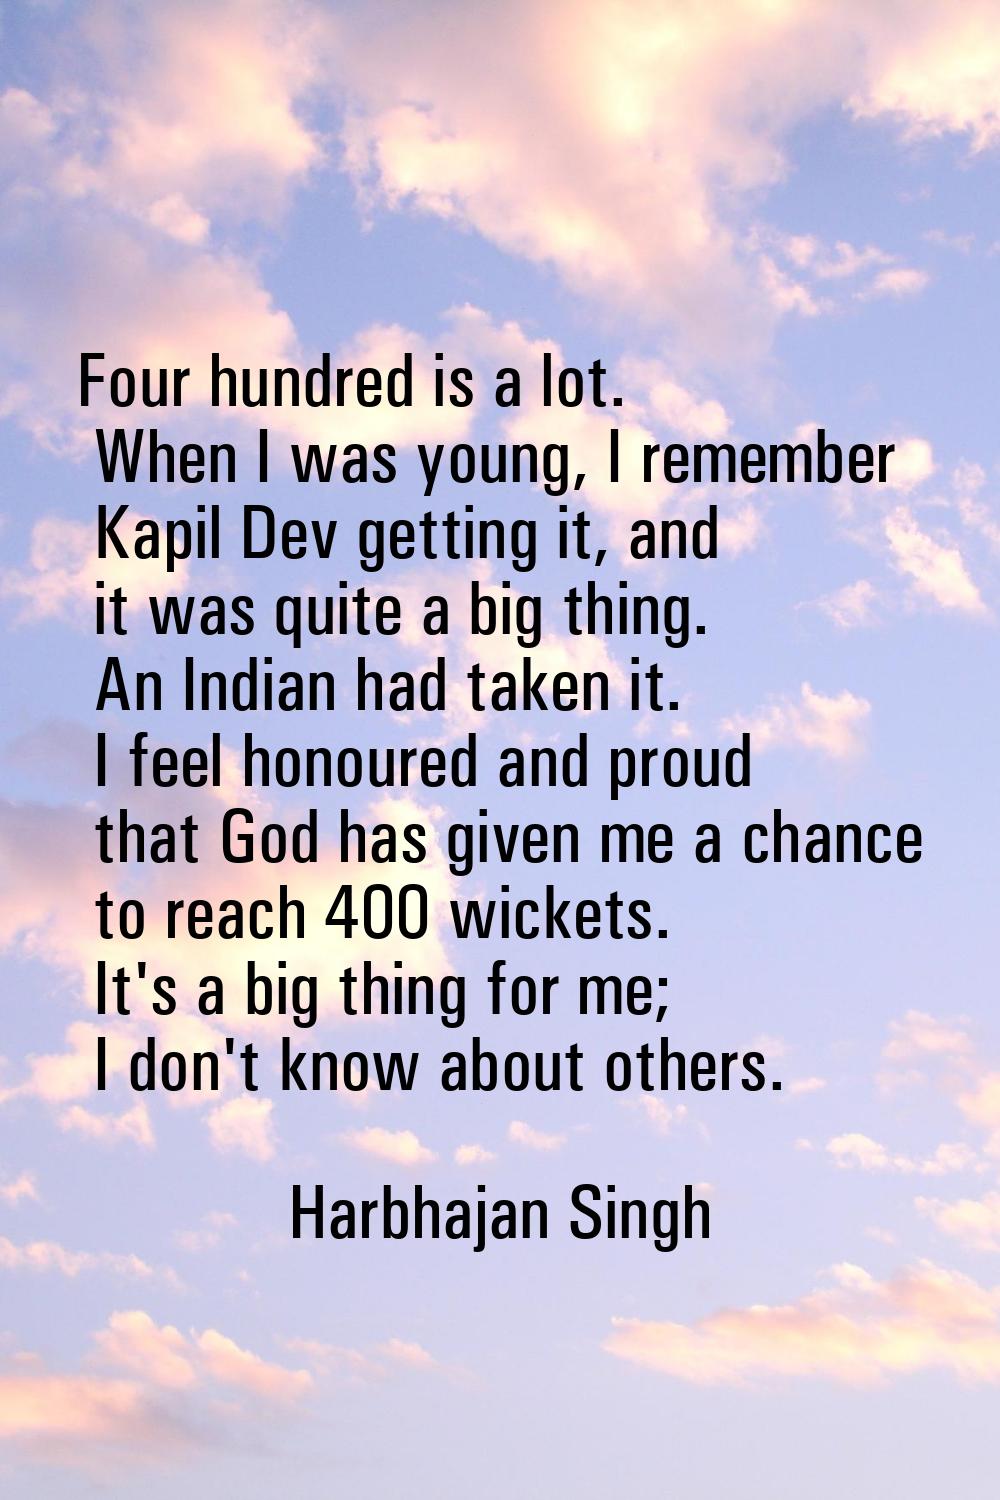 Four hundred is a lot. When I was young, I remember Kapil Dev getting it, and it was quite a big th